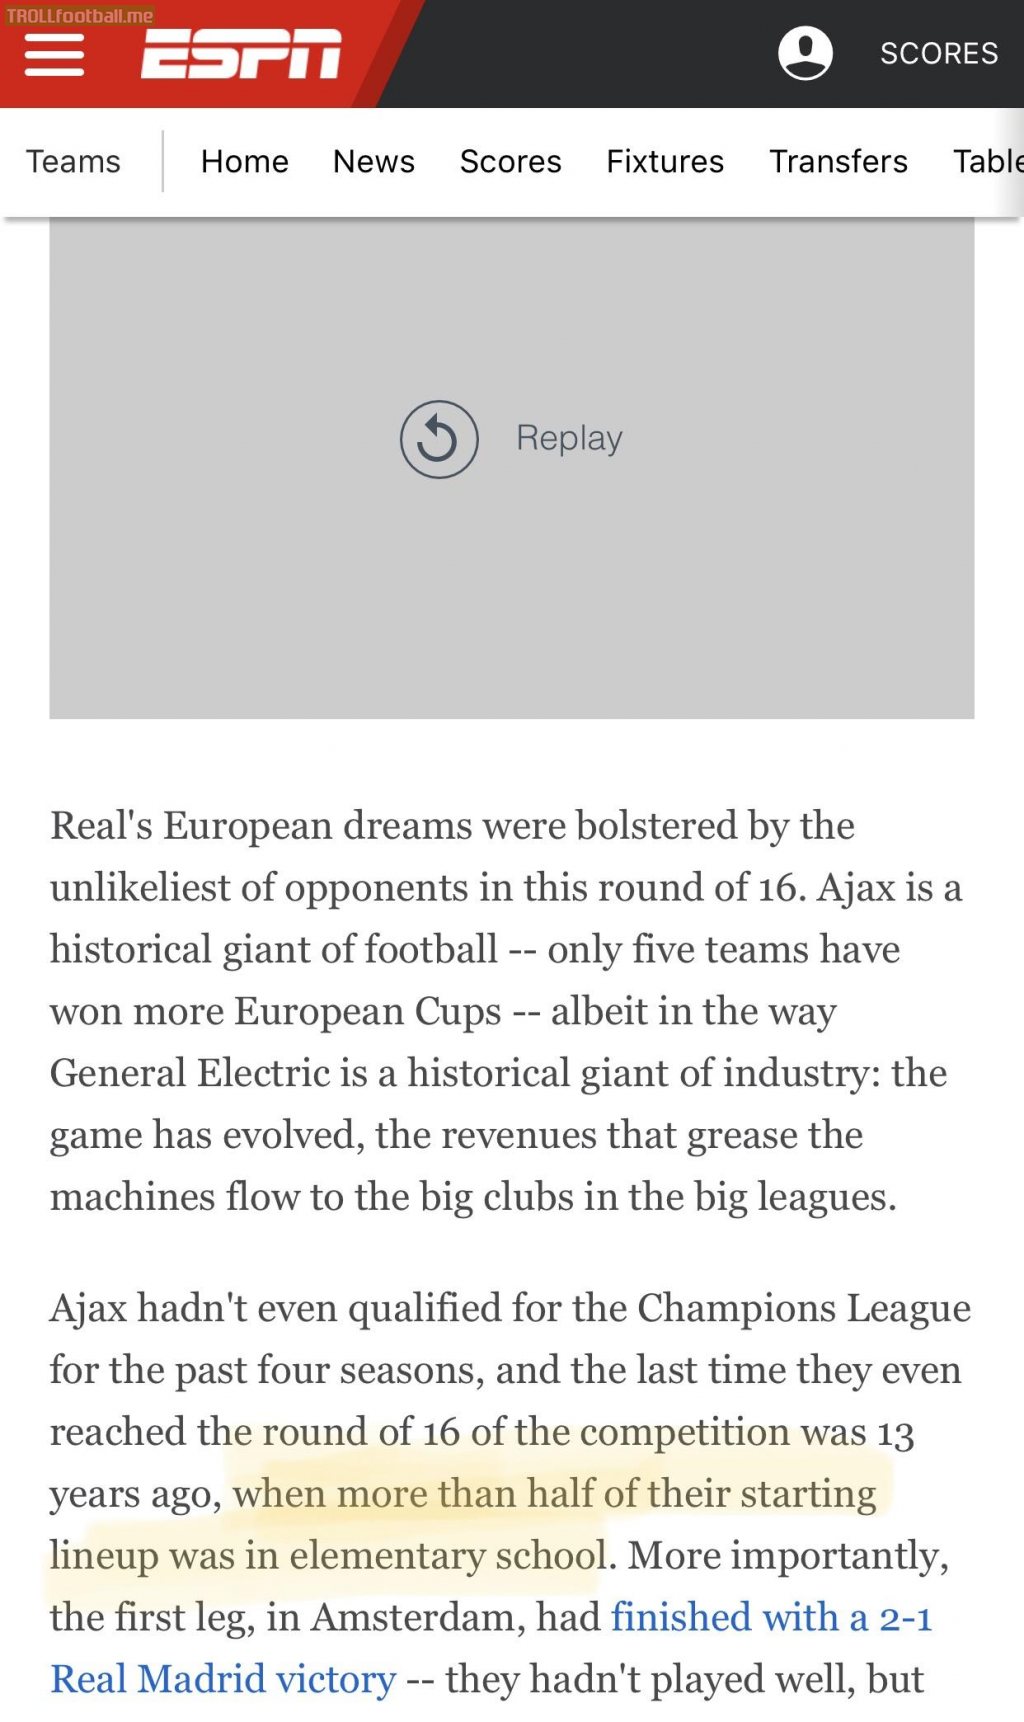 Quality journalism espn! If half of Ajax’s team was in elementary school then they did incredibly well to reach the round of 16.